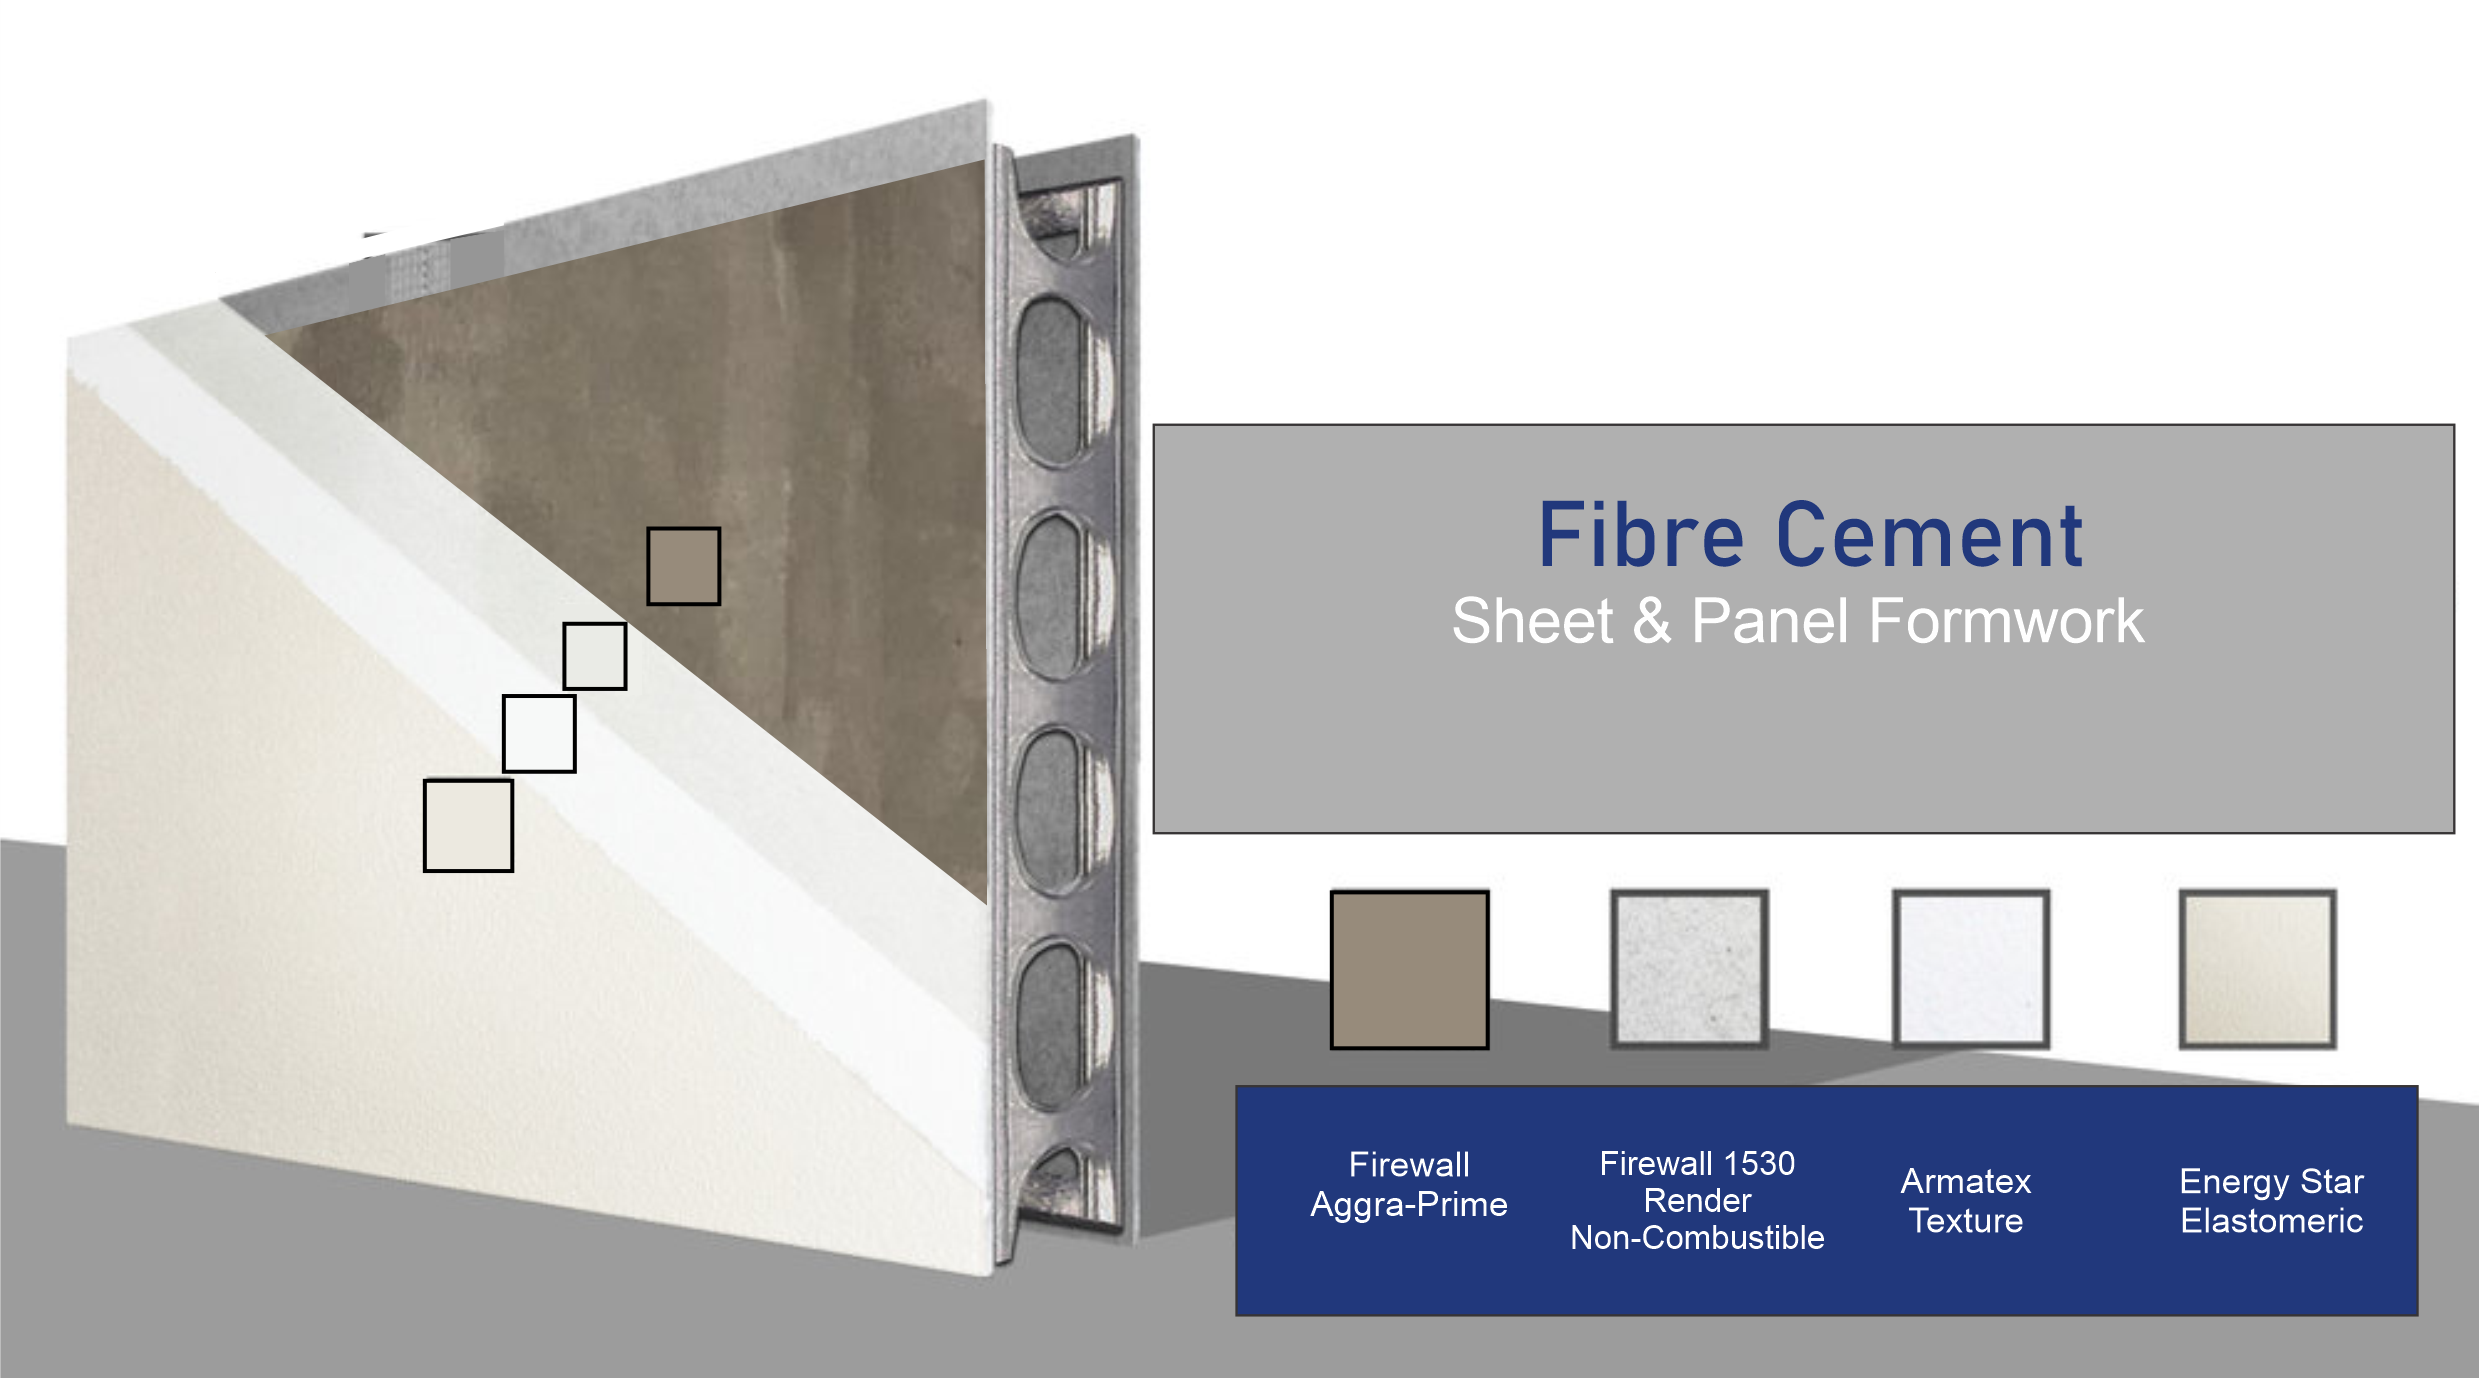 Non Combustible Render for Fibre Cement Sheet and Panel Firewall